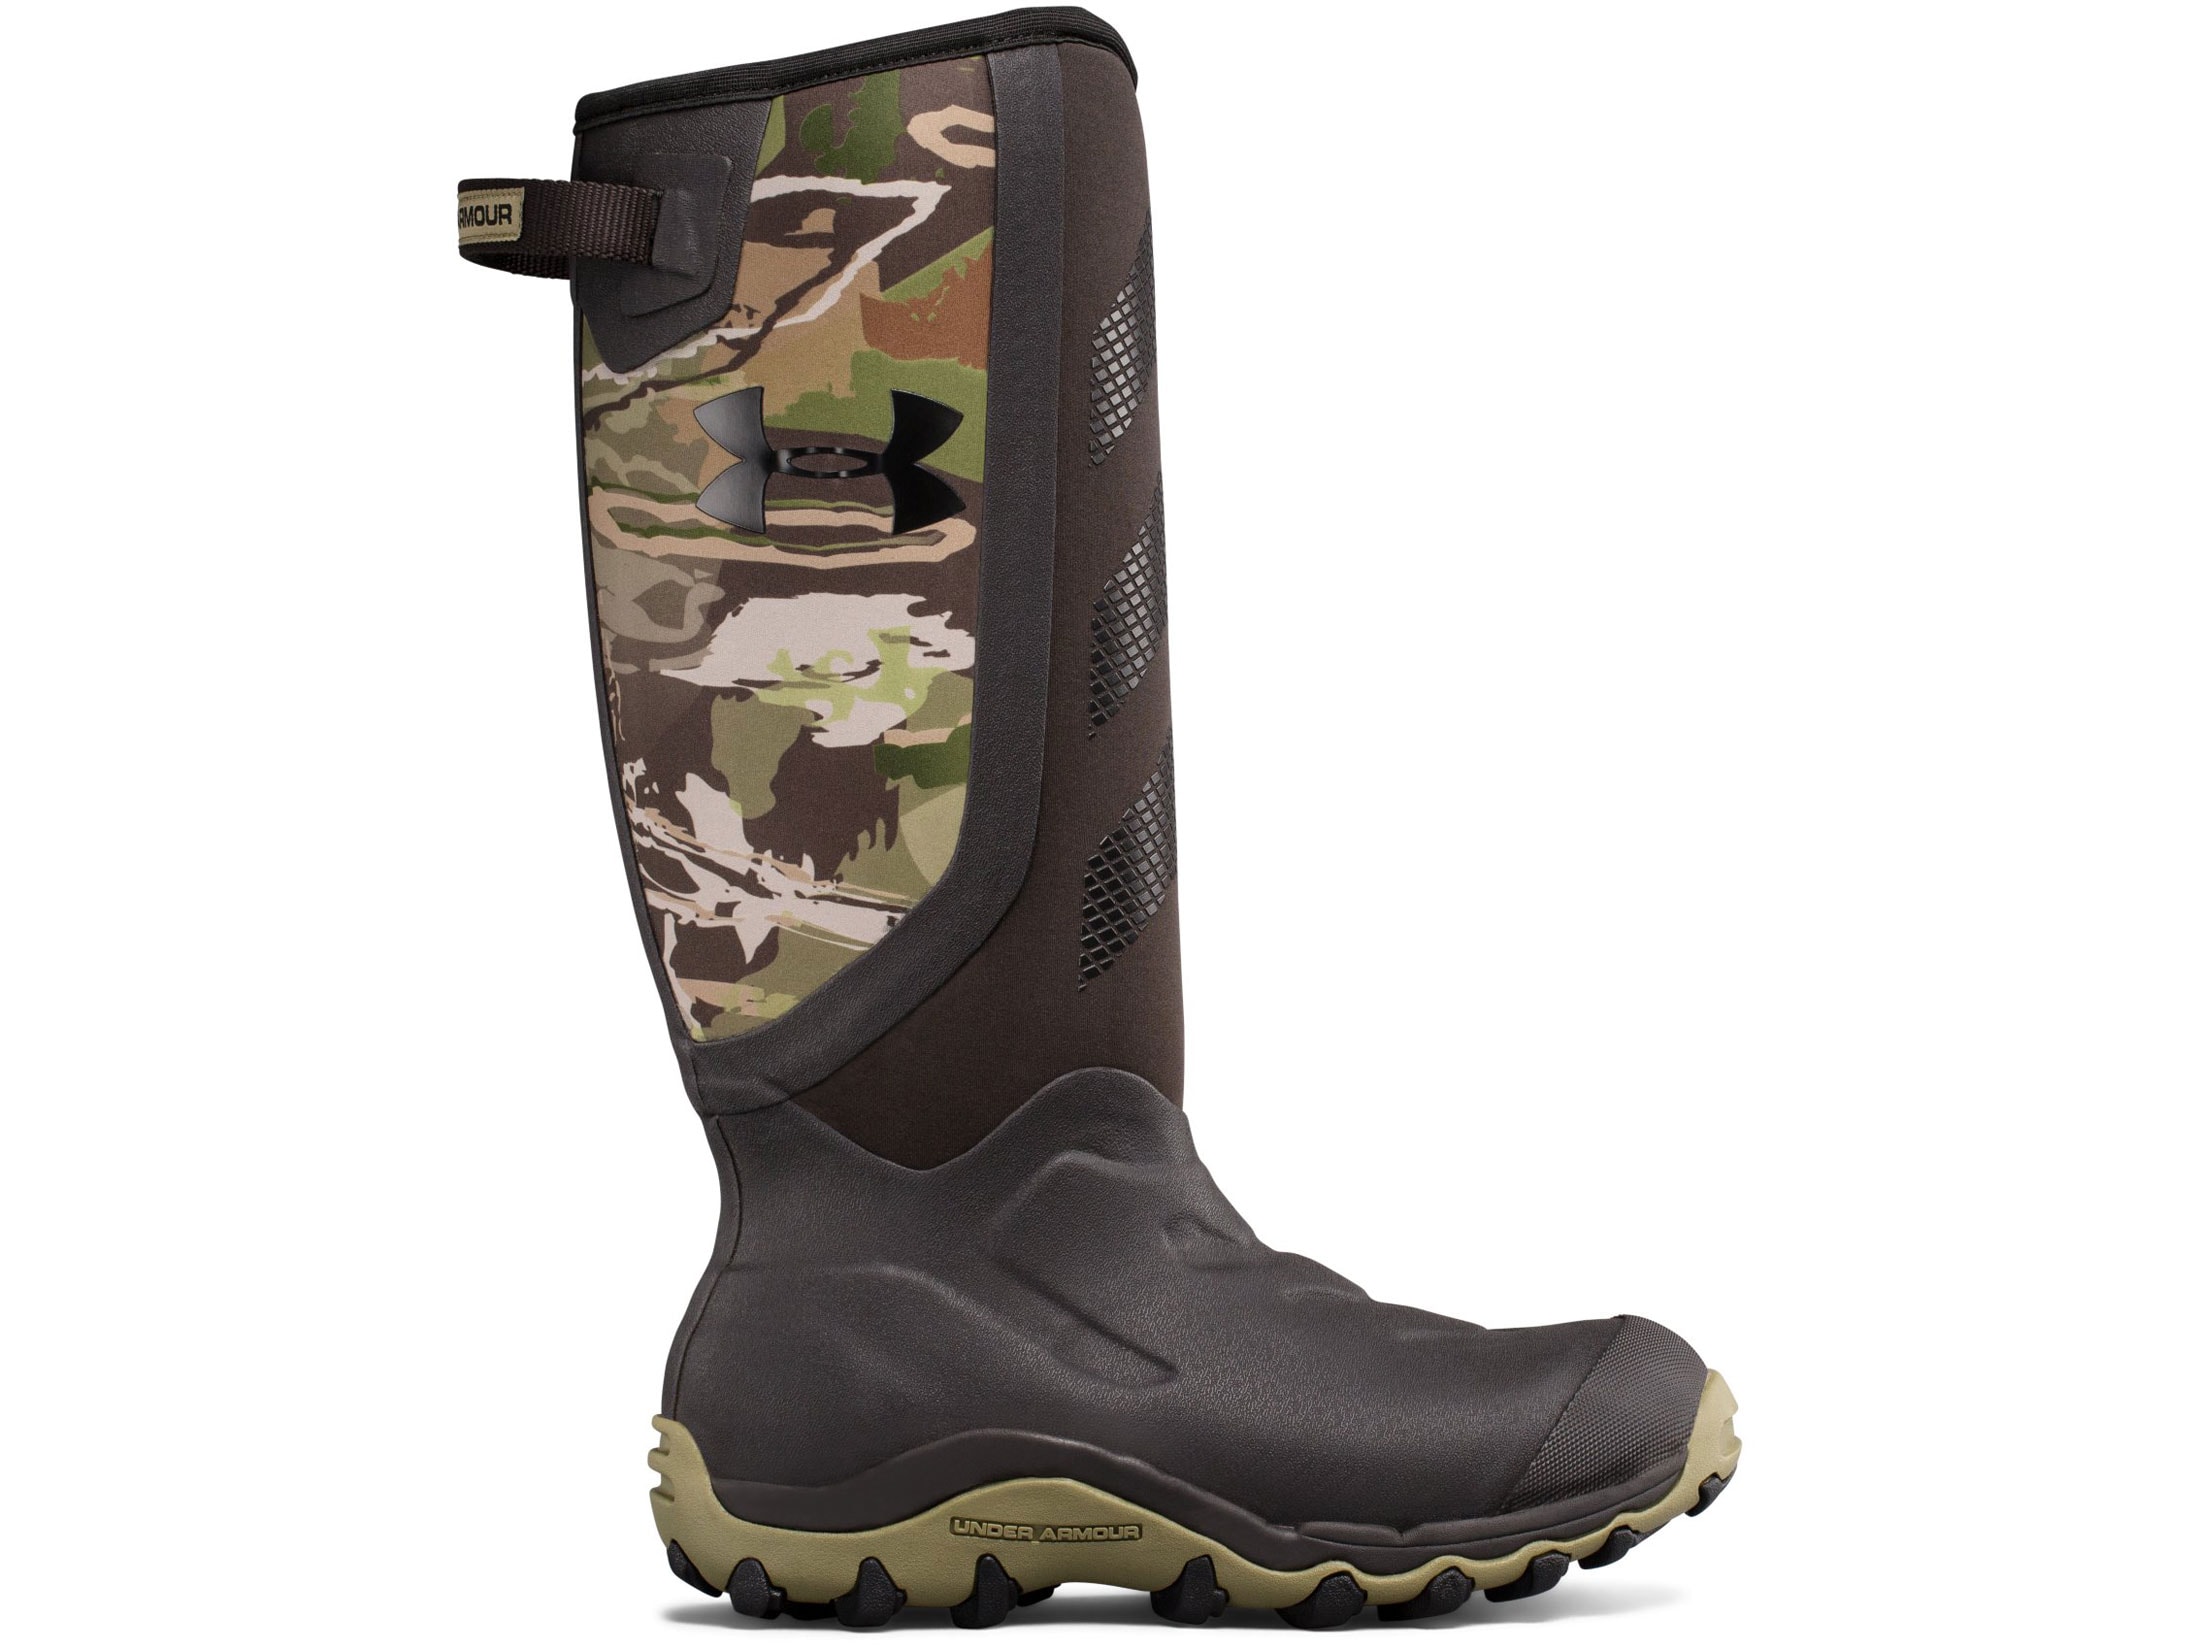 Gram Insulated Hunting Boots Rubber